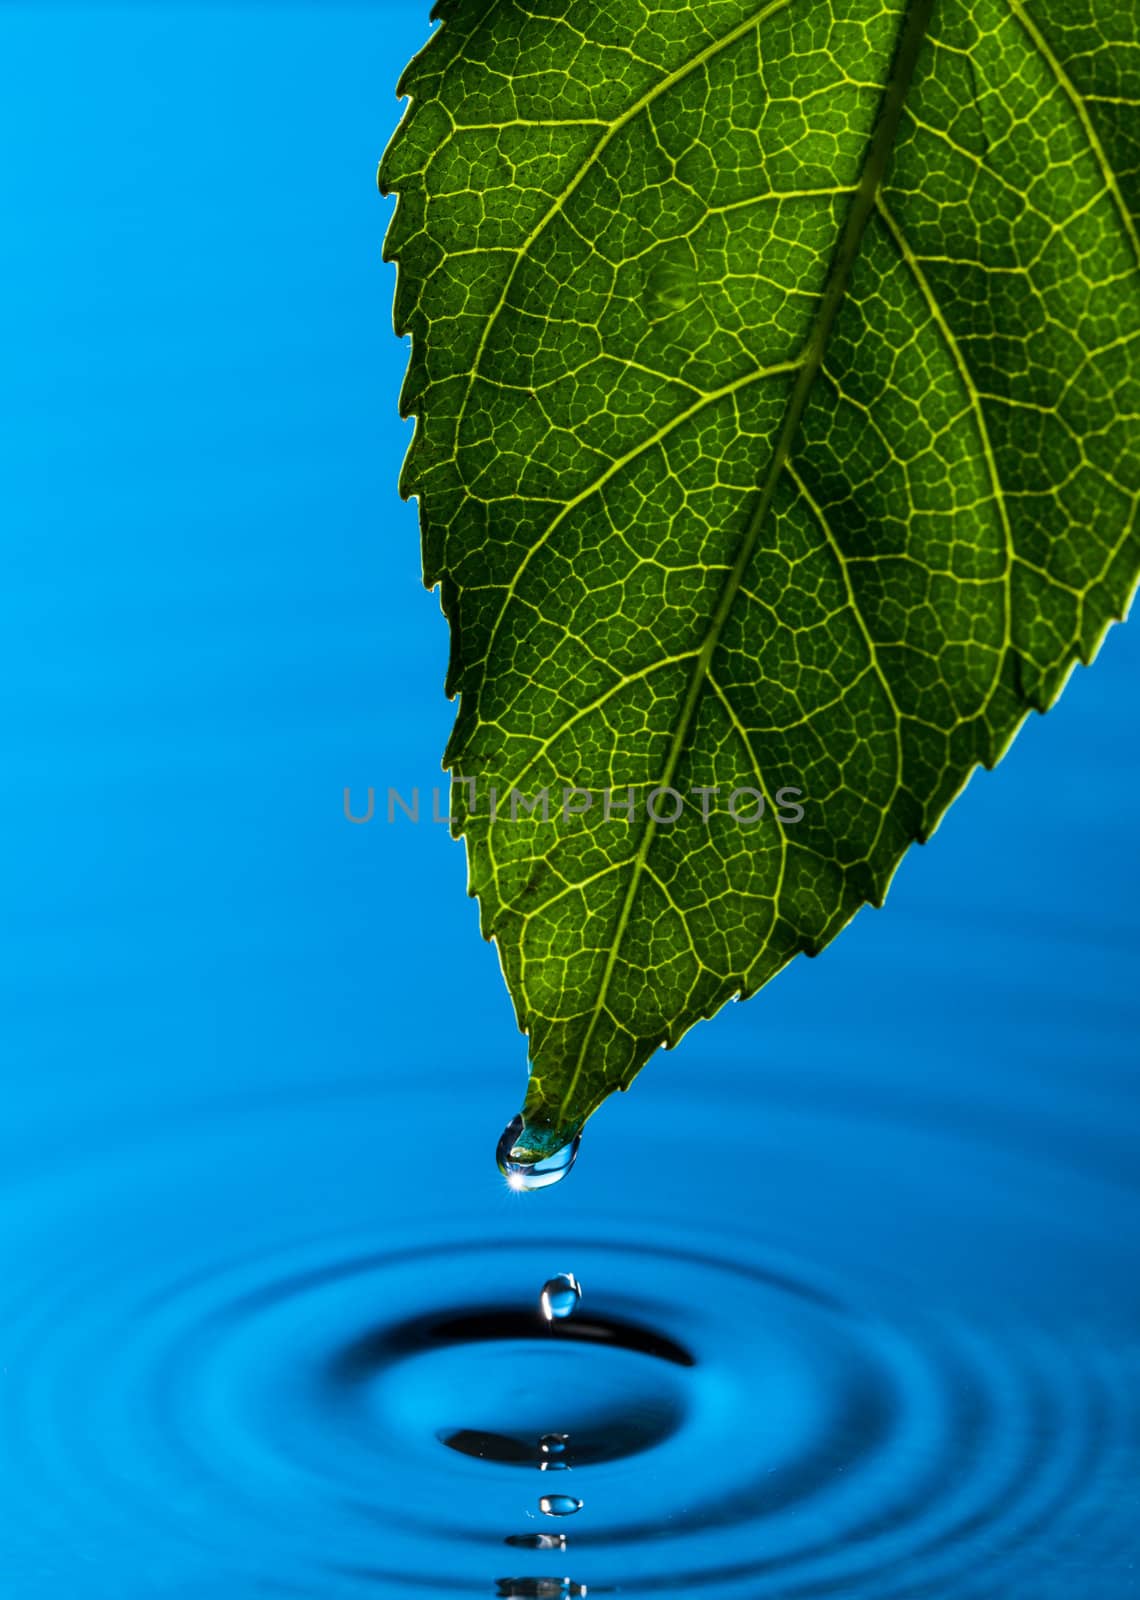 Green Leaf and Water Drop with Reflection